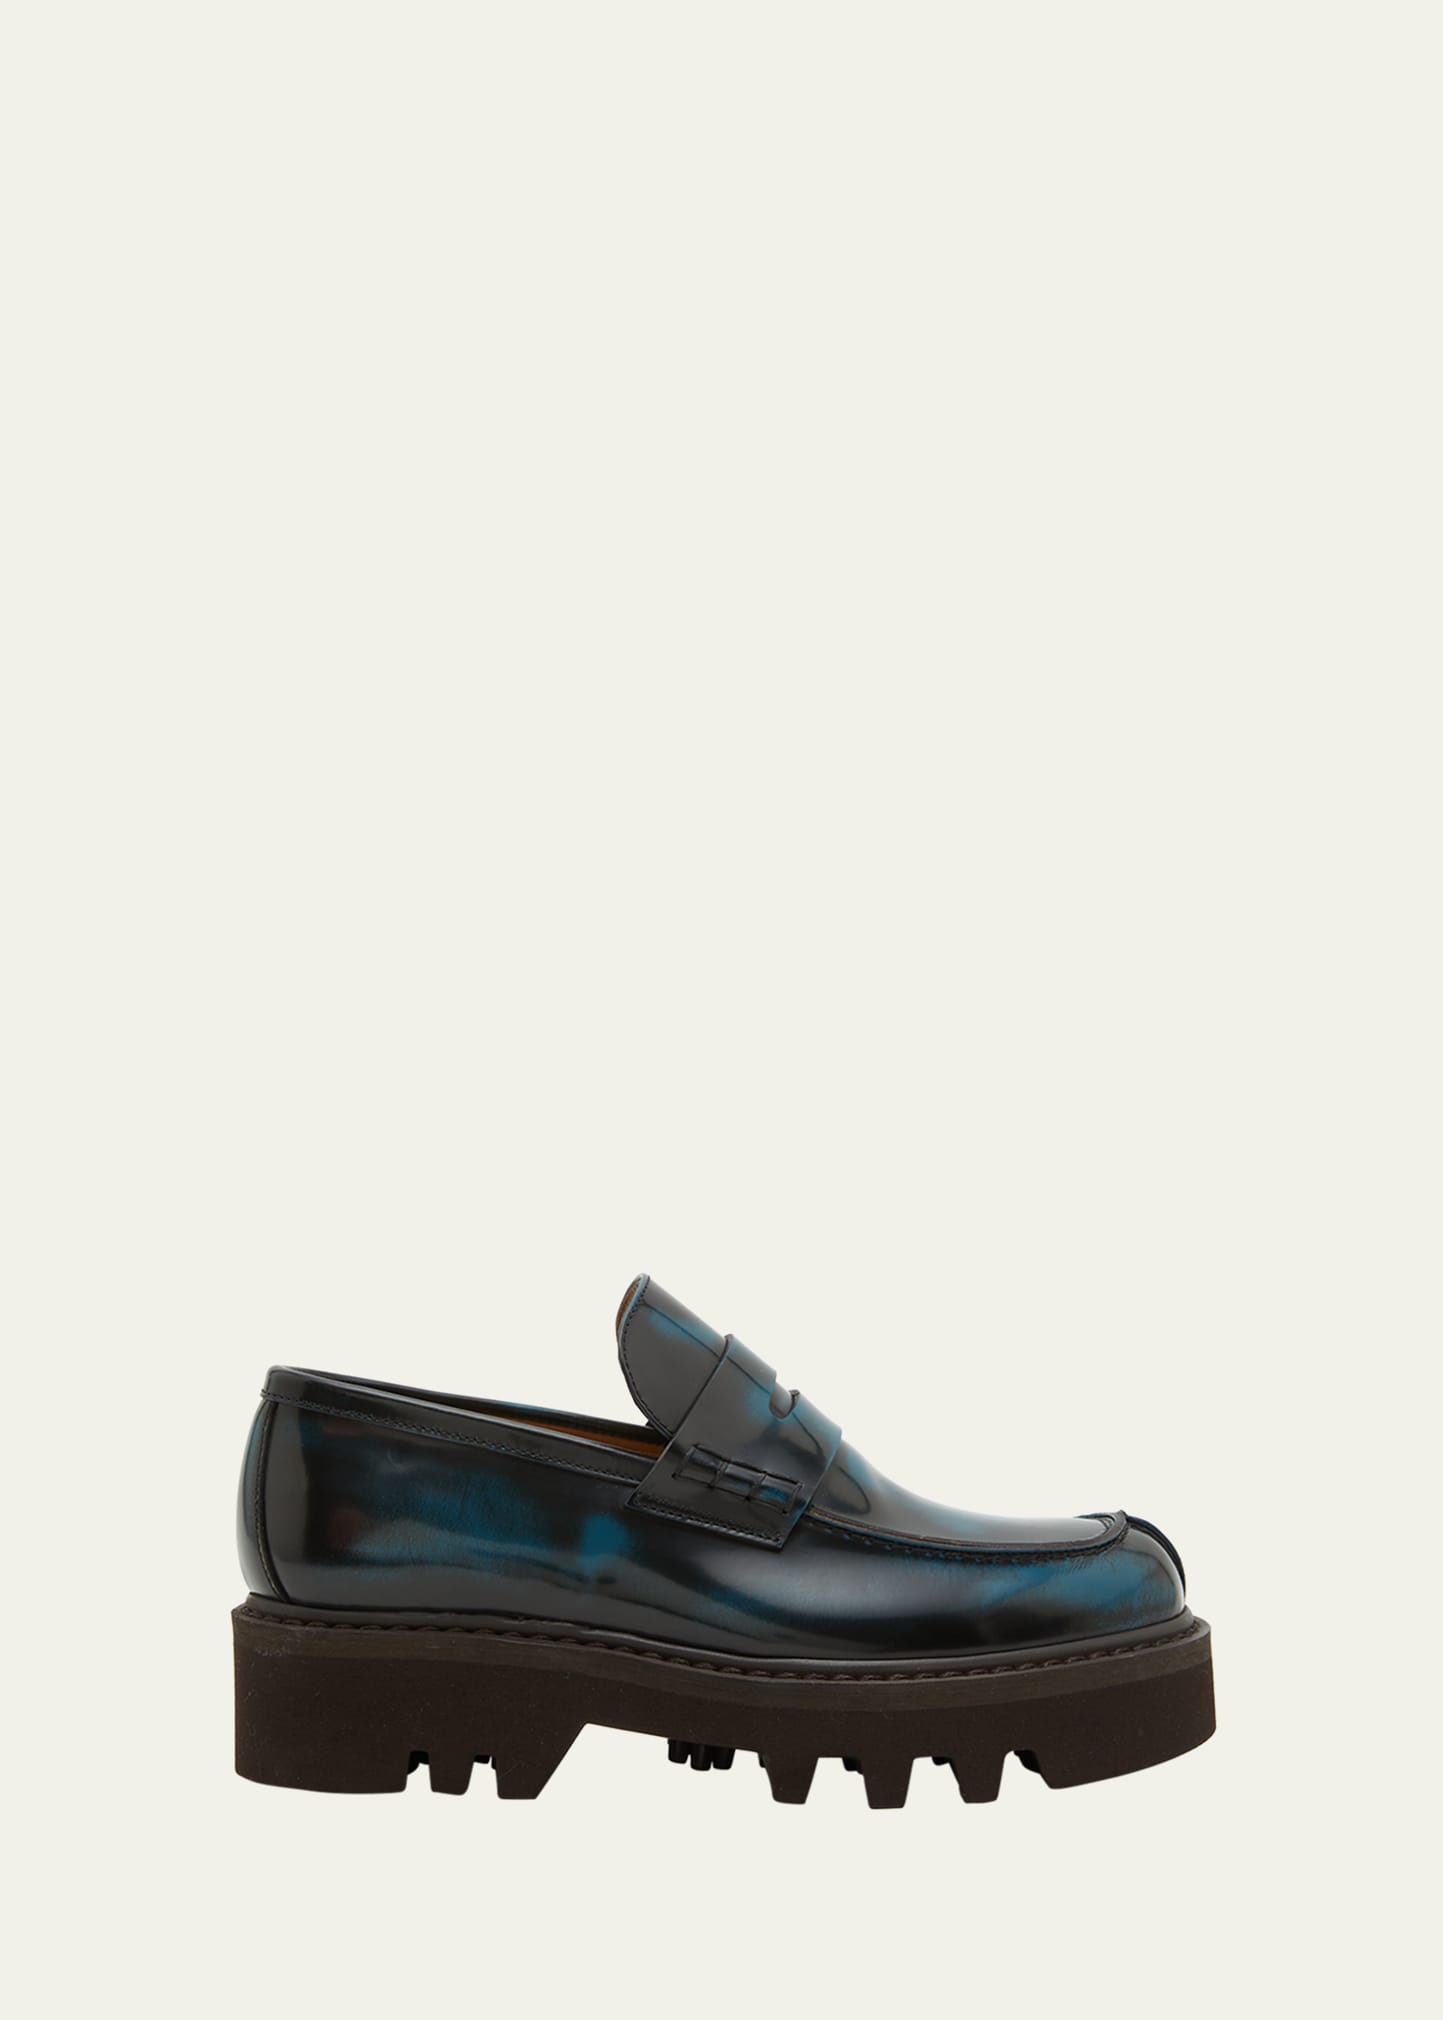 Dries Van Noten Leather Penny Loafers In Petrol